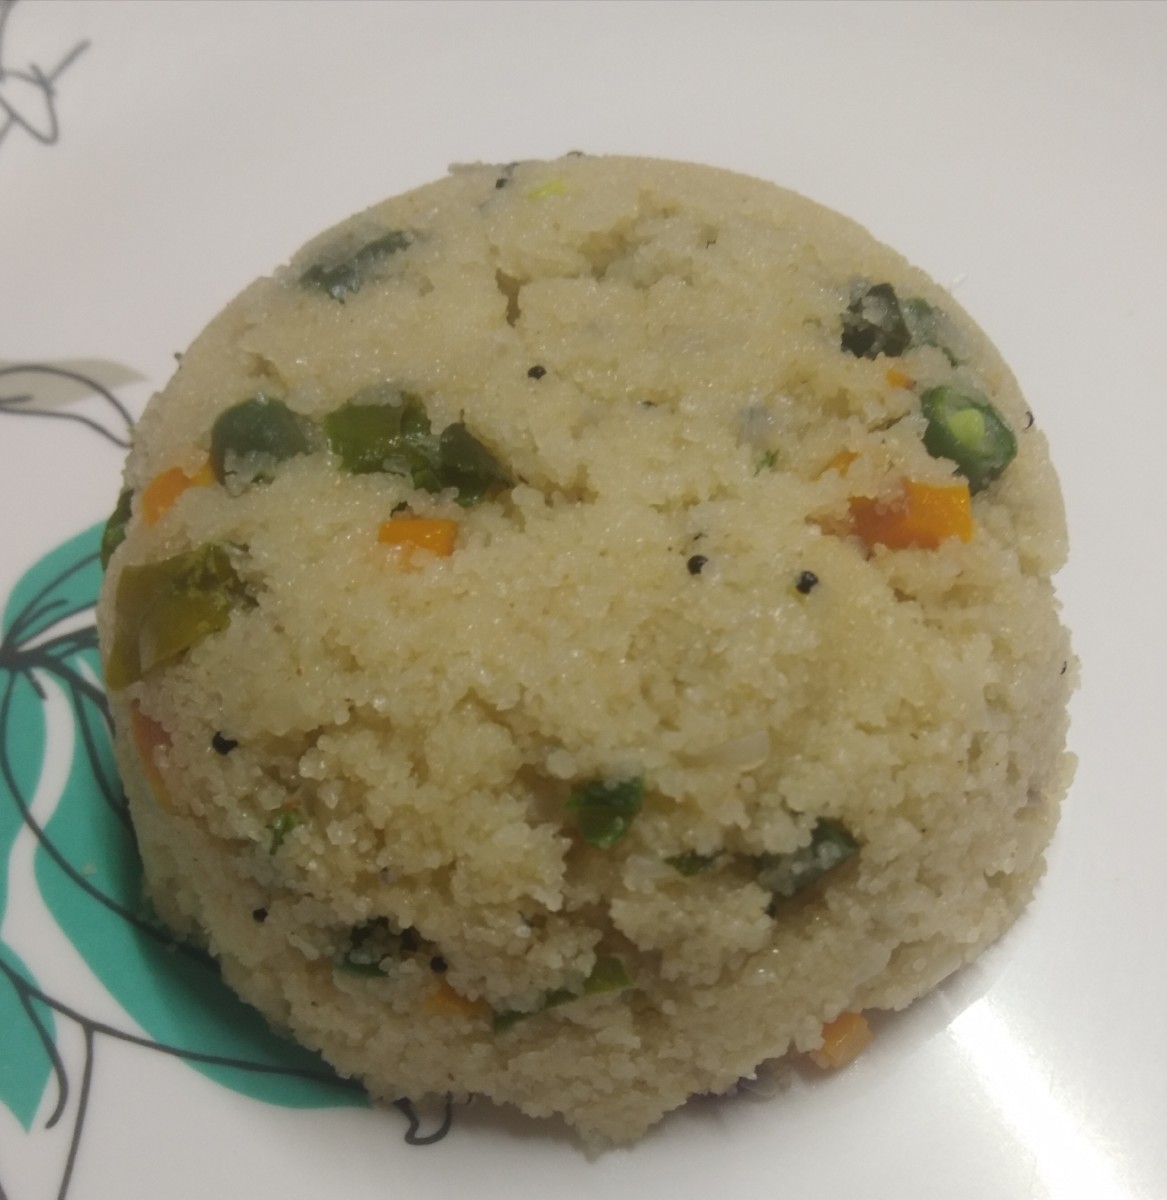 Soft, yummy vegetable upma is ready to eat.